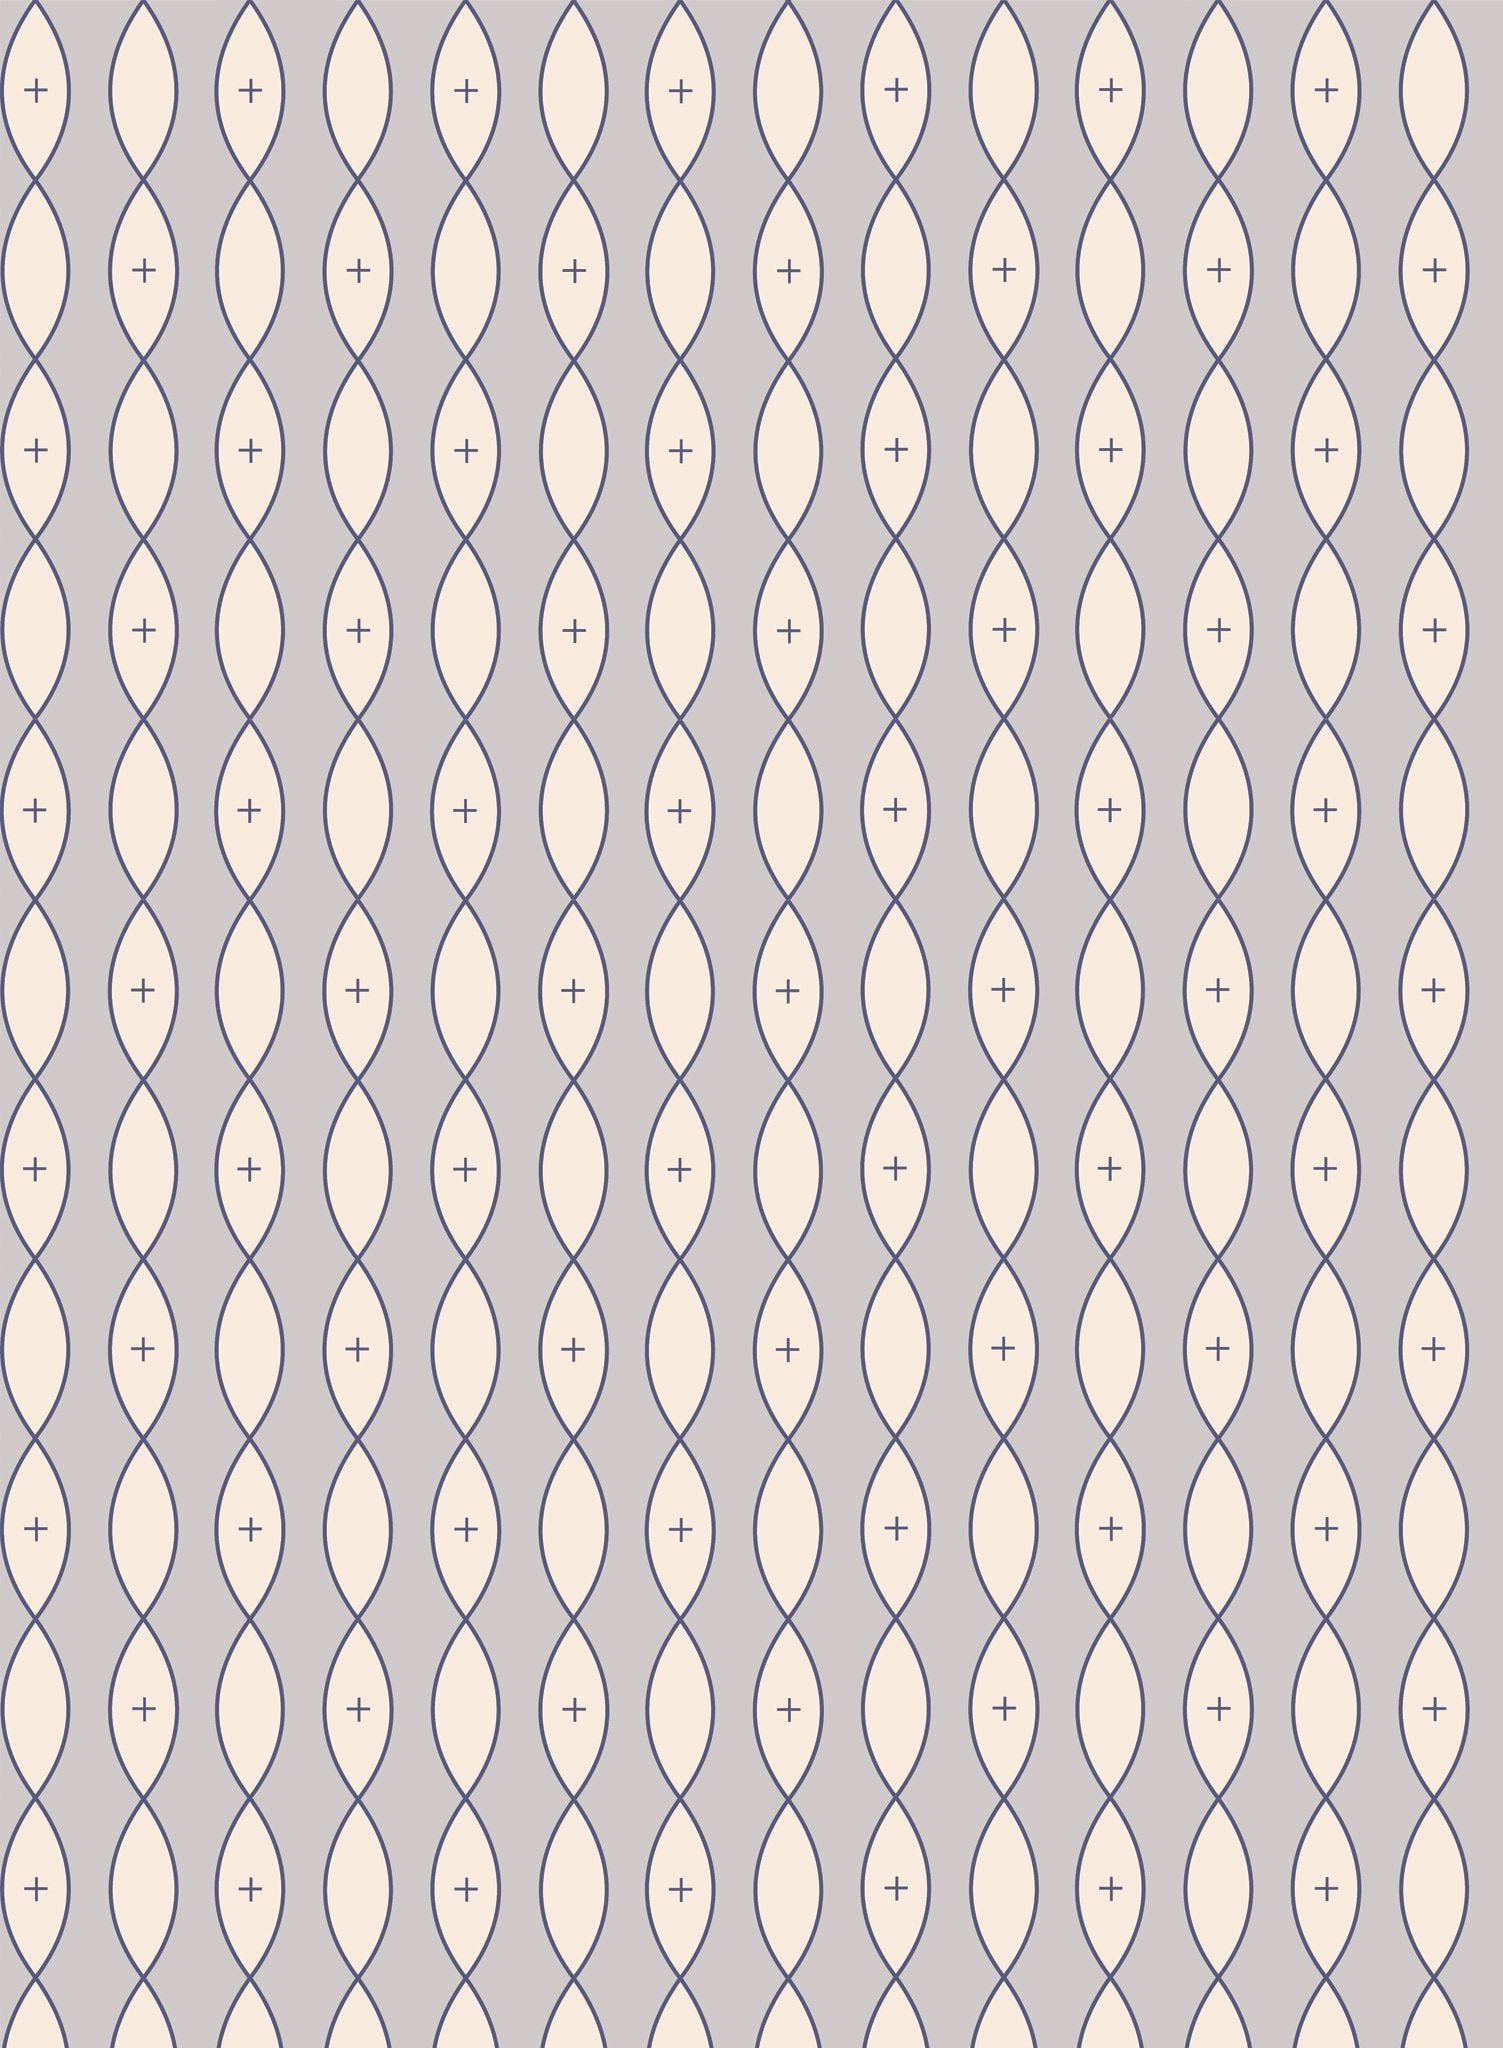 Idyll is a minimalist wallpaper by Opposite Wall of vertical garlands of pointed oval shapes.